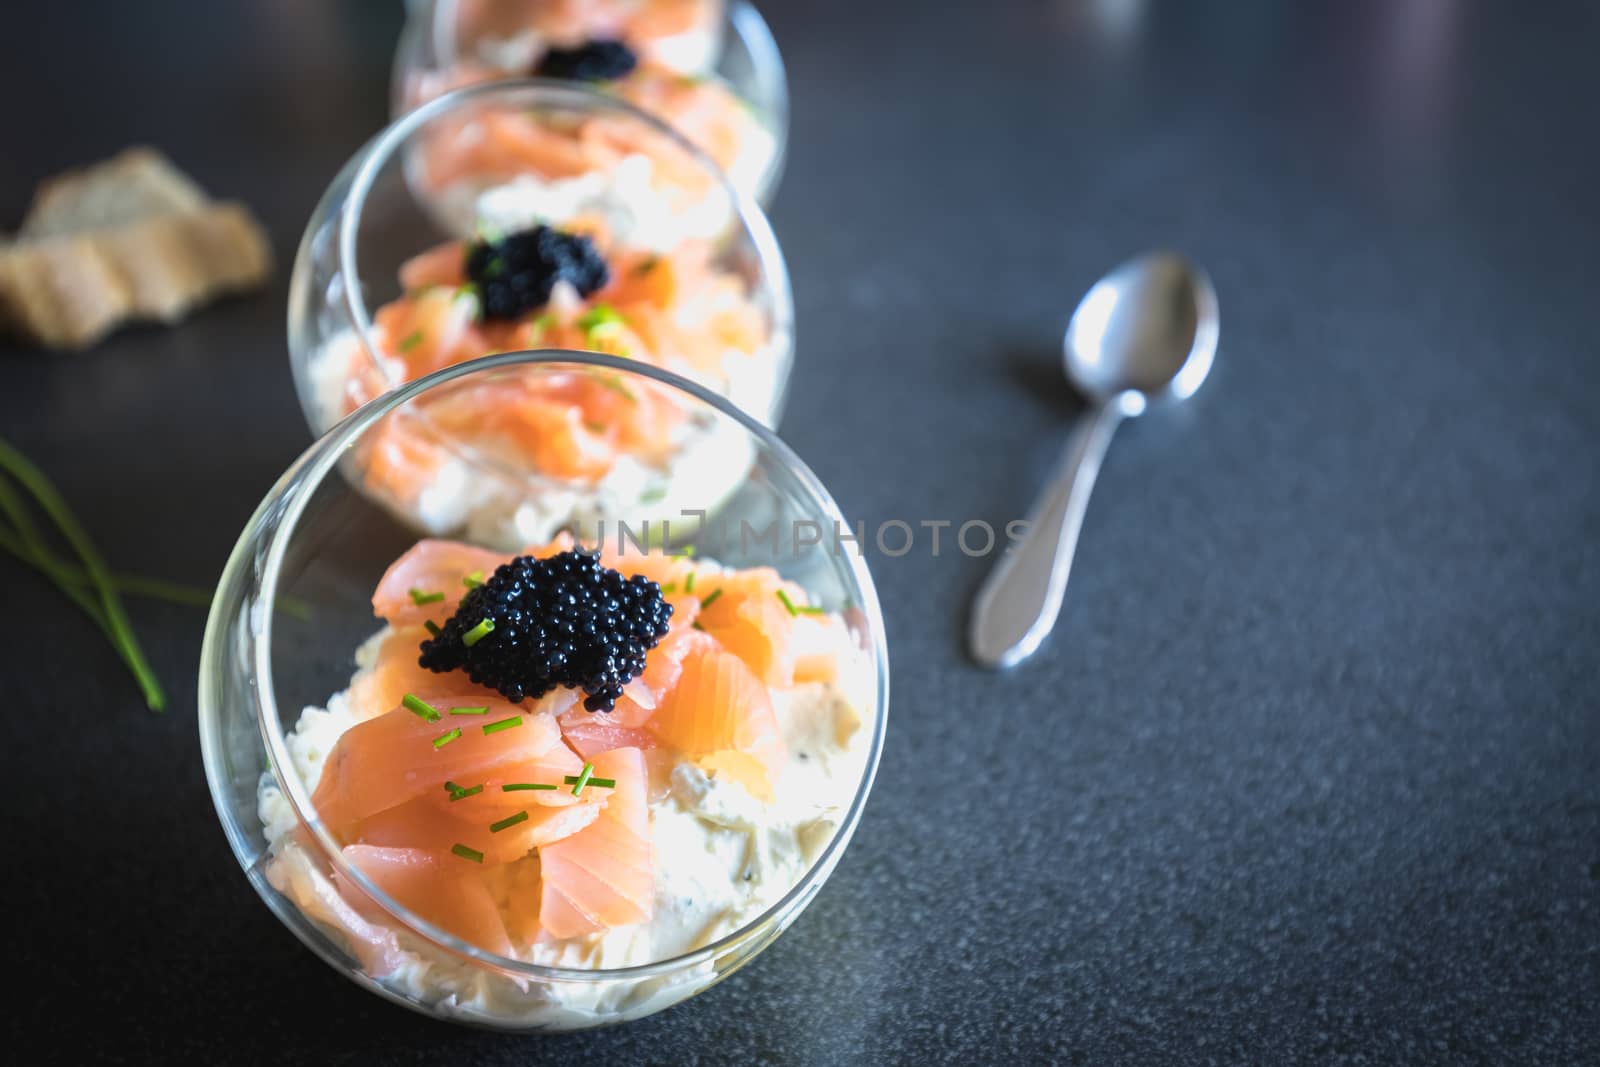 verrine salmon lumpfish egg fresh cheese and avocado bed in the kitchen